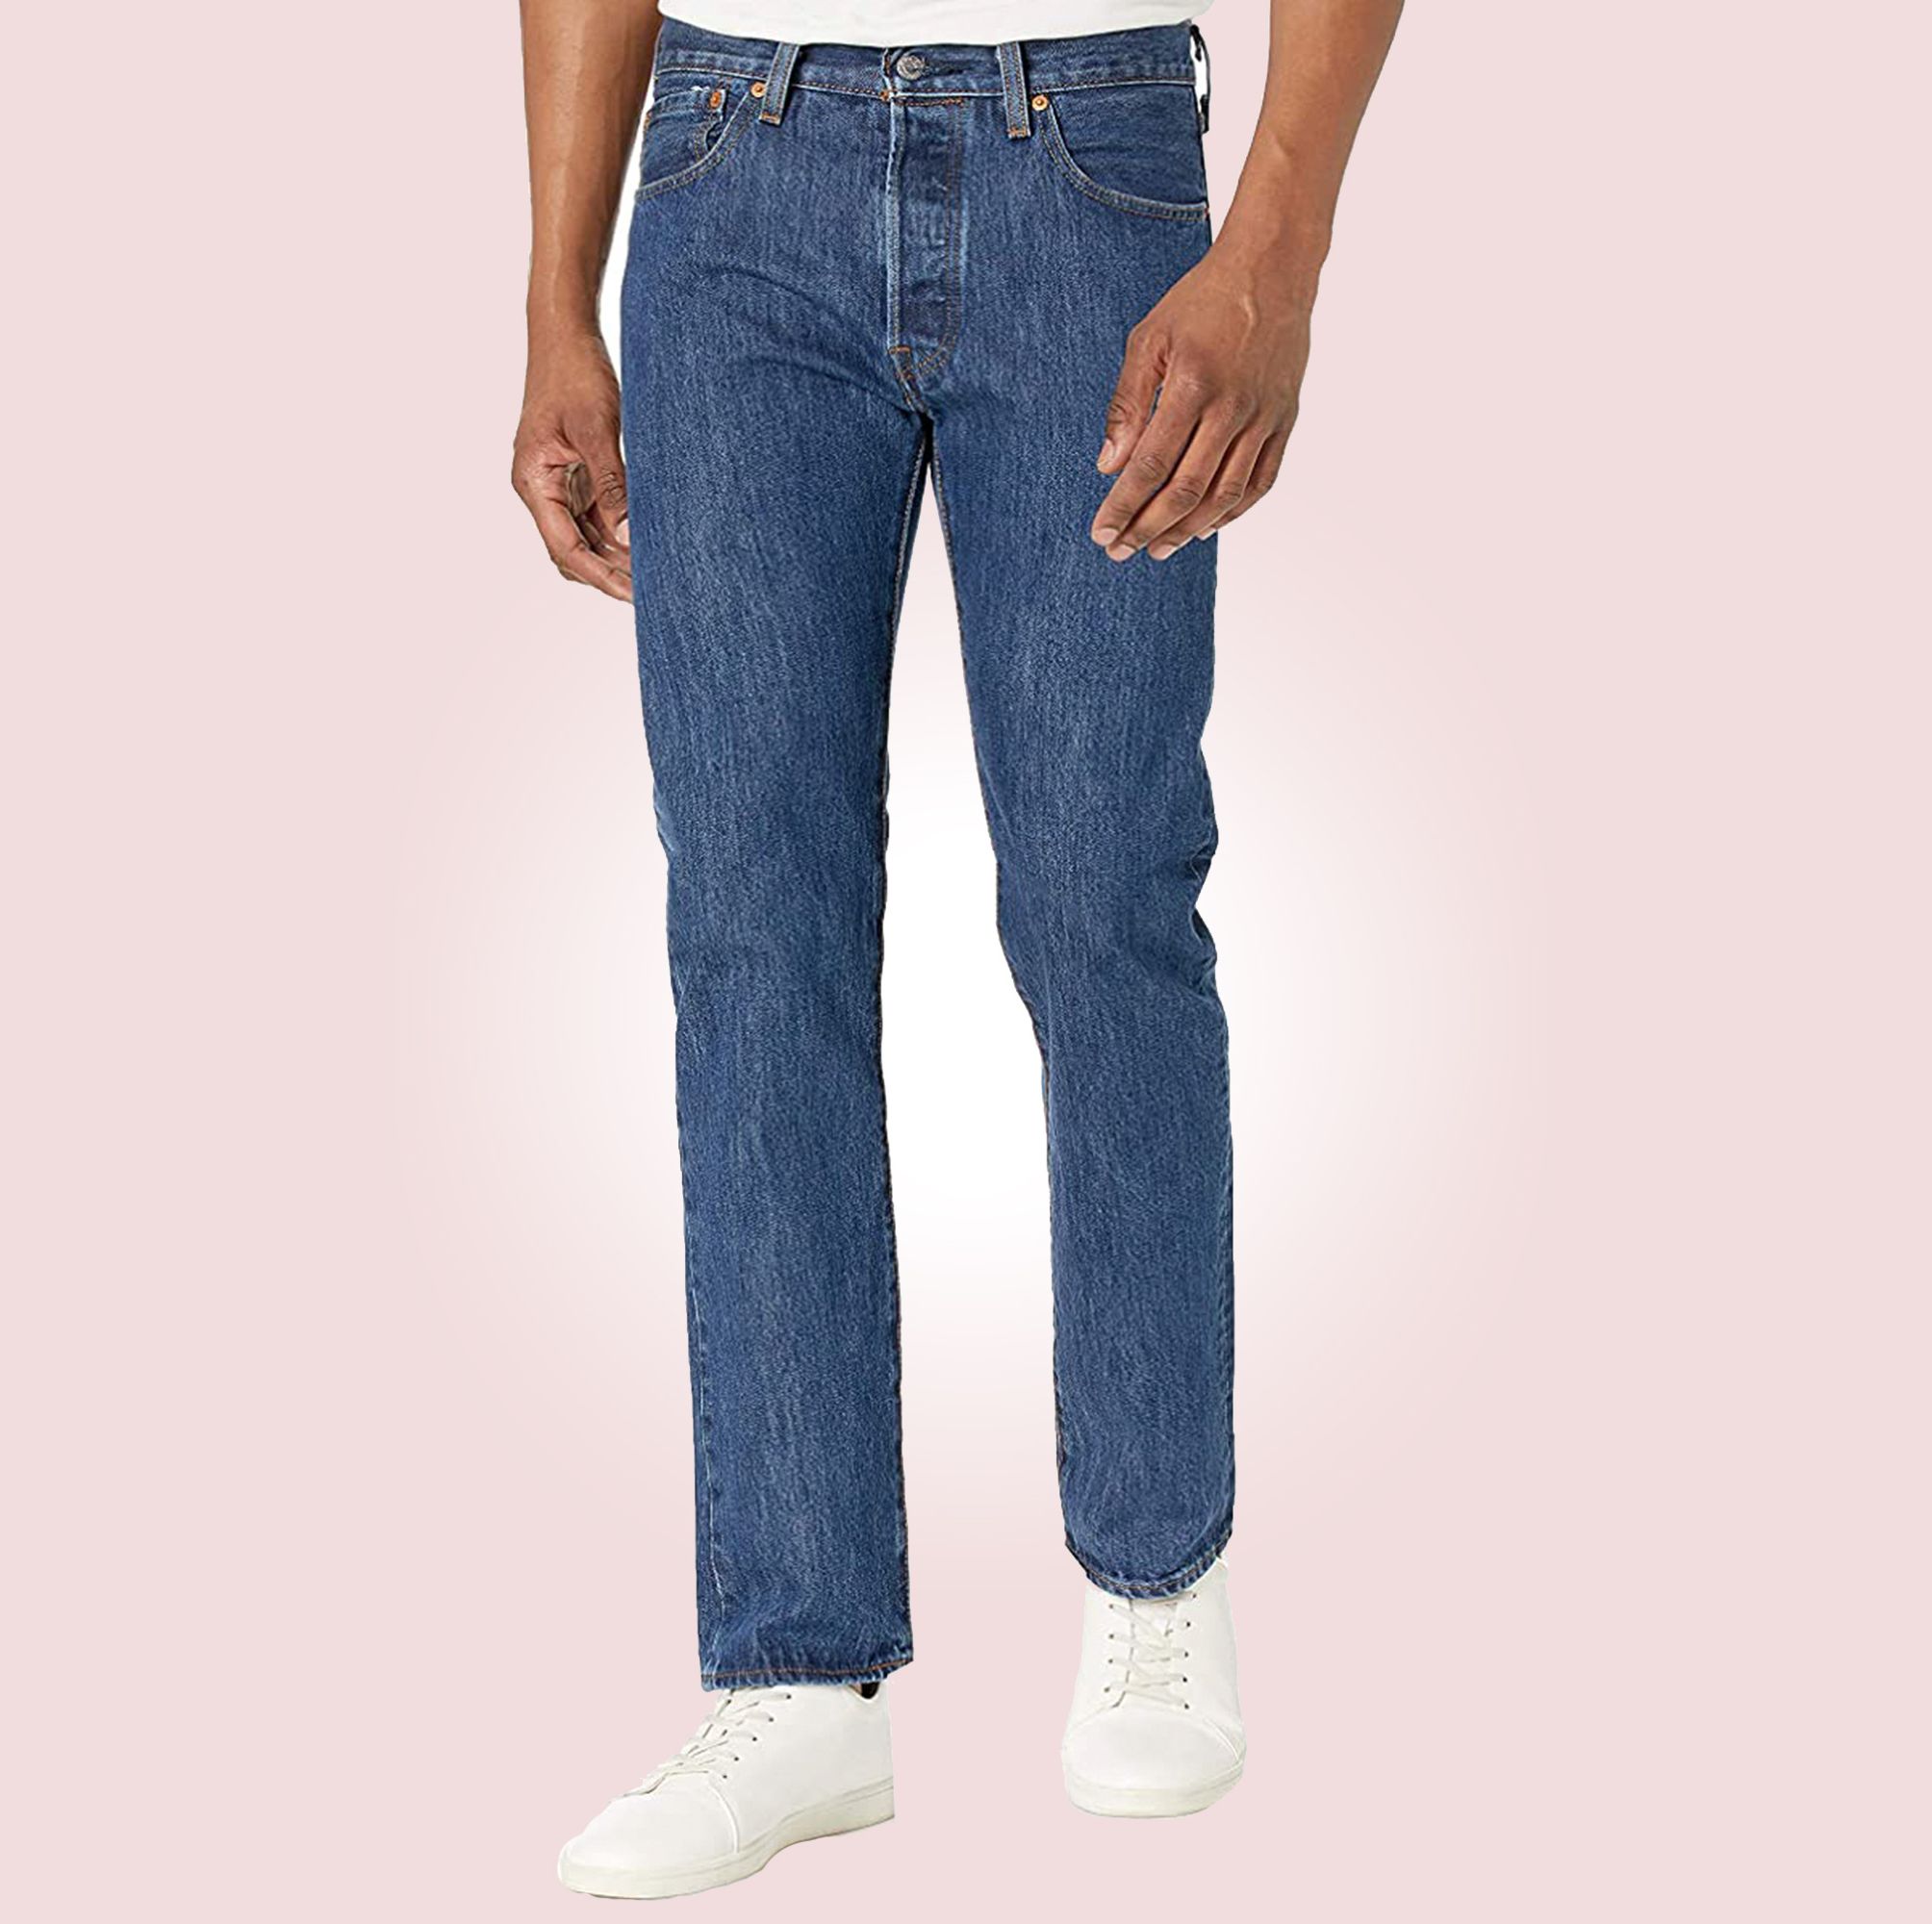 The Best Jeans on Amazon, No Matter What Fit You're Looking For